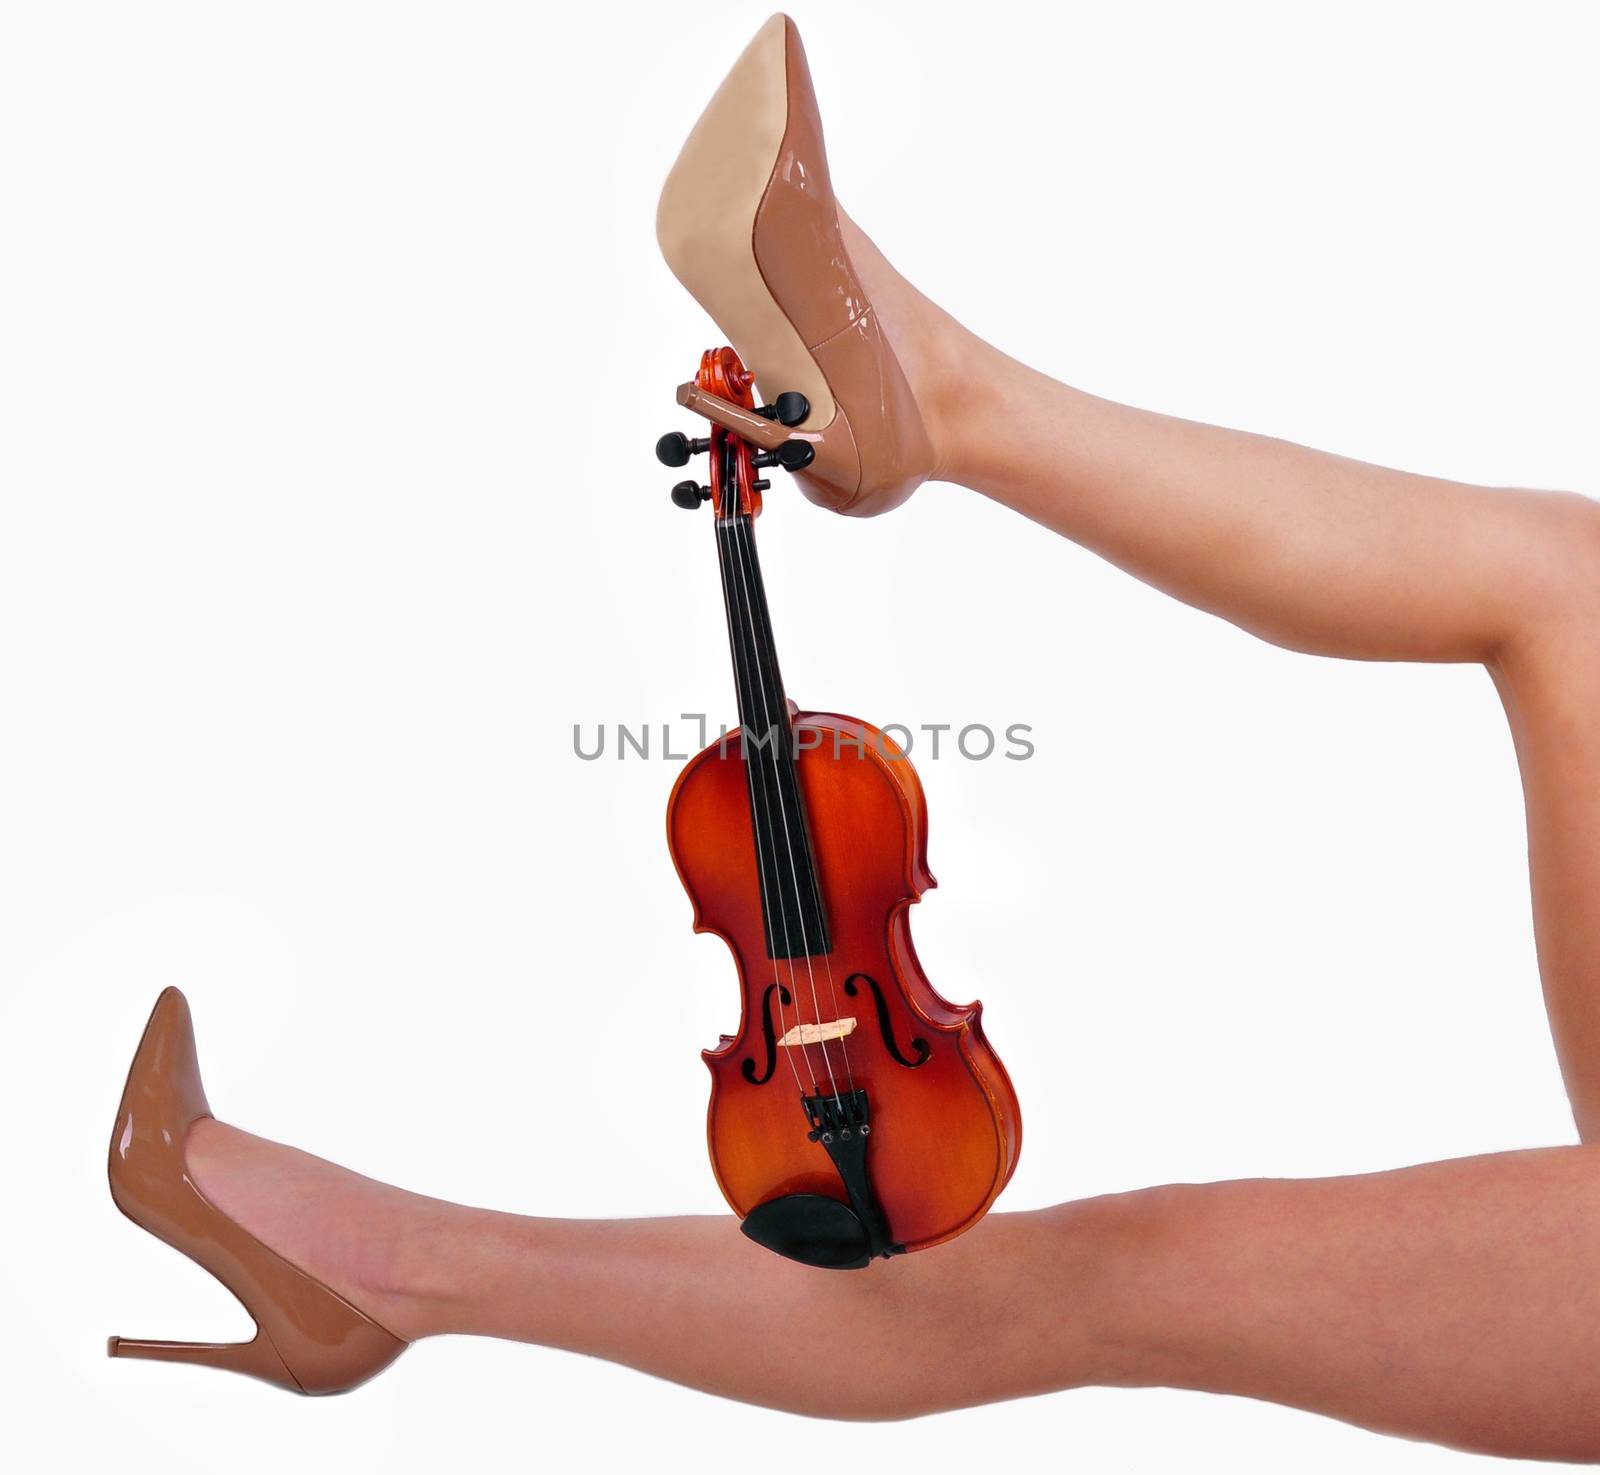 sexy legs girl holding violin isolated on white background by Nikola30